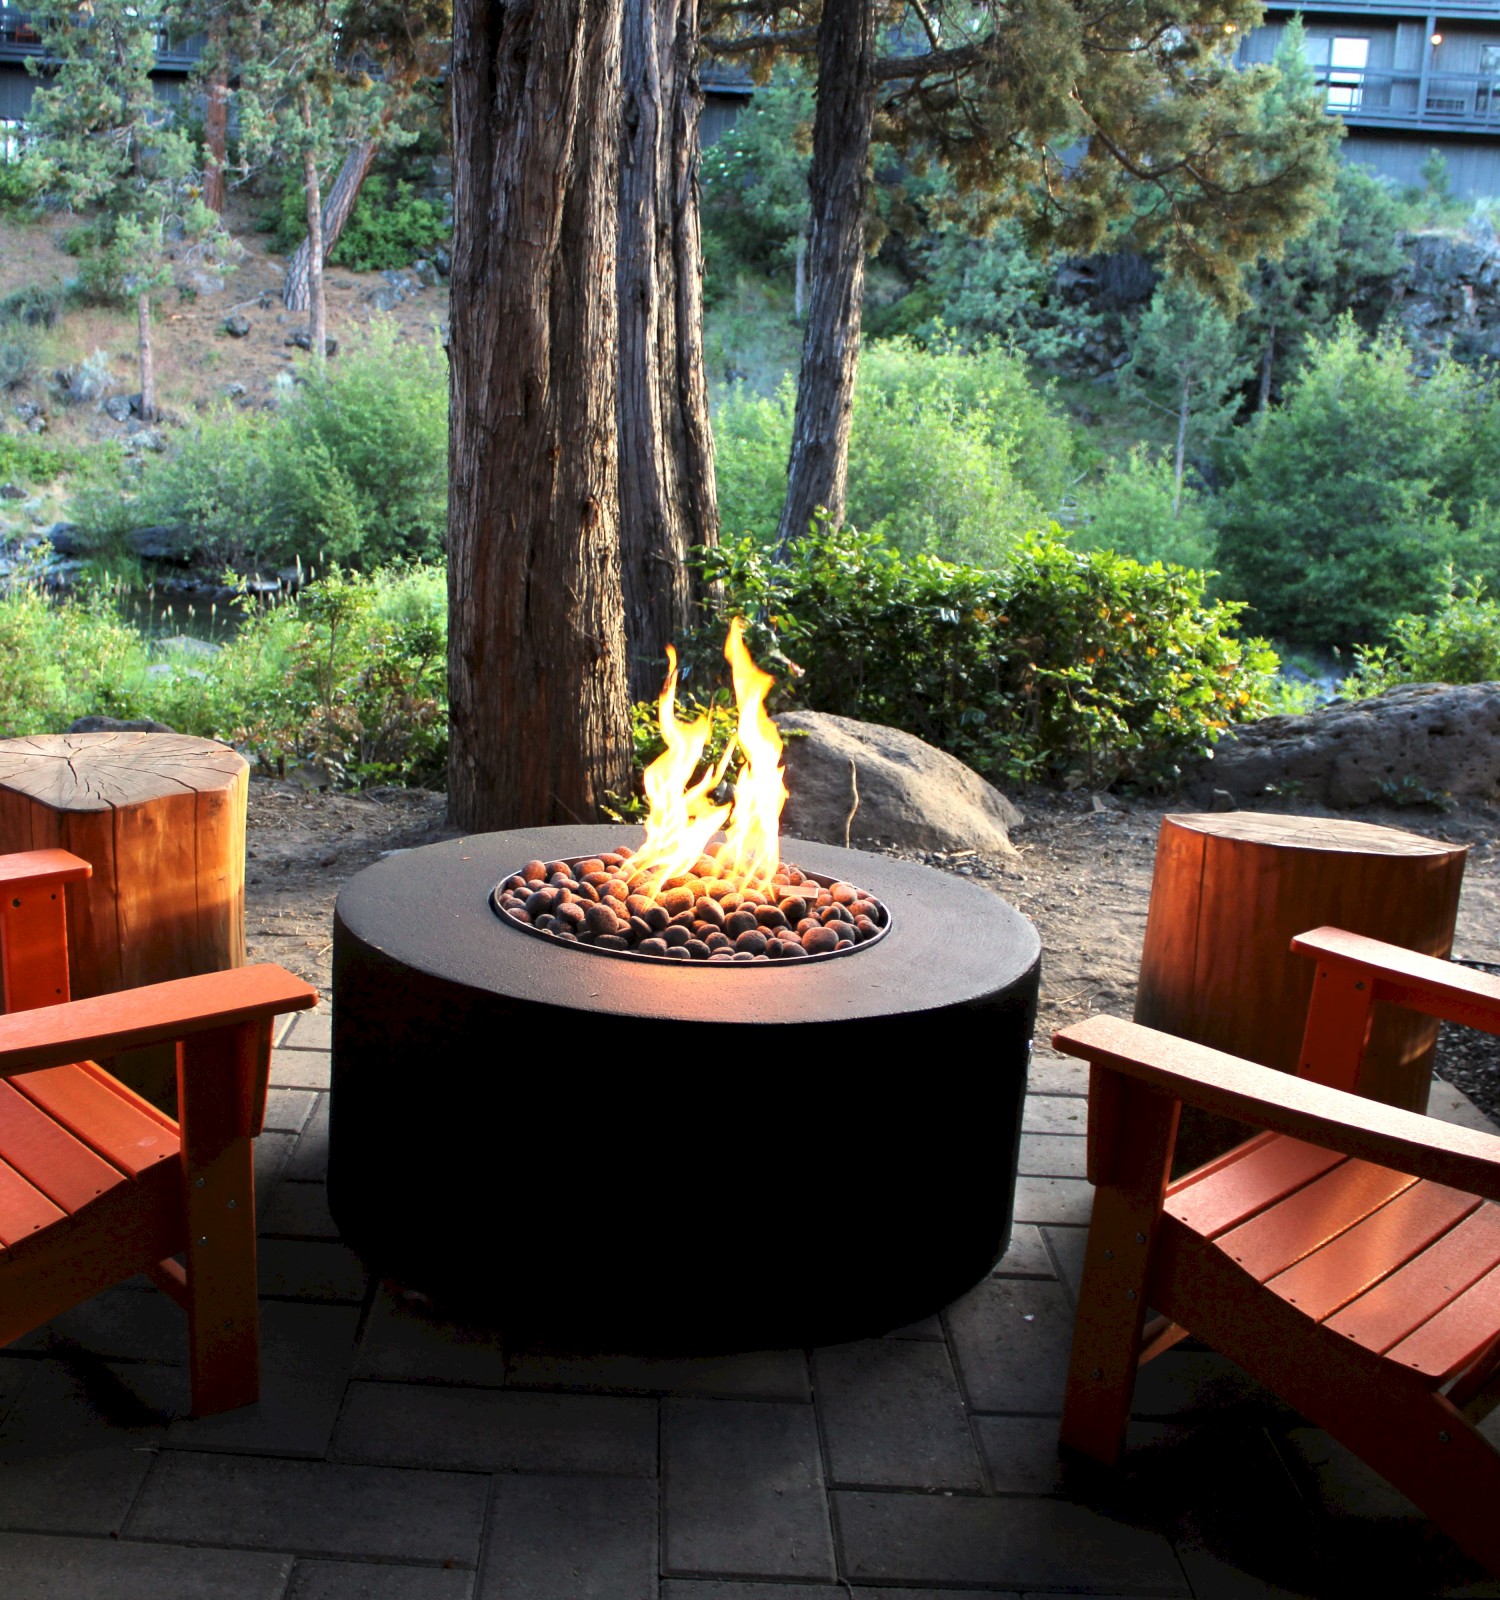 A cozy outdoor seating area features two wooden chairs and a fire pit, surrounded by trees and greenery, with a fence on one side.